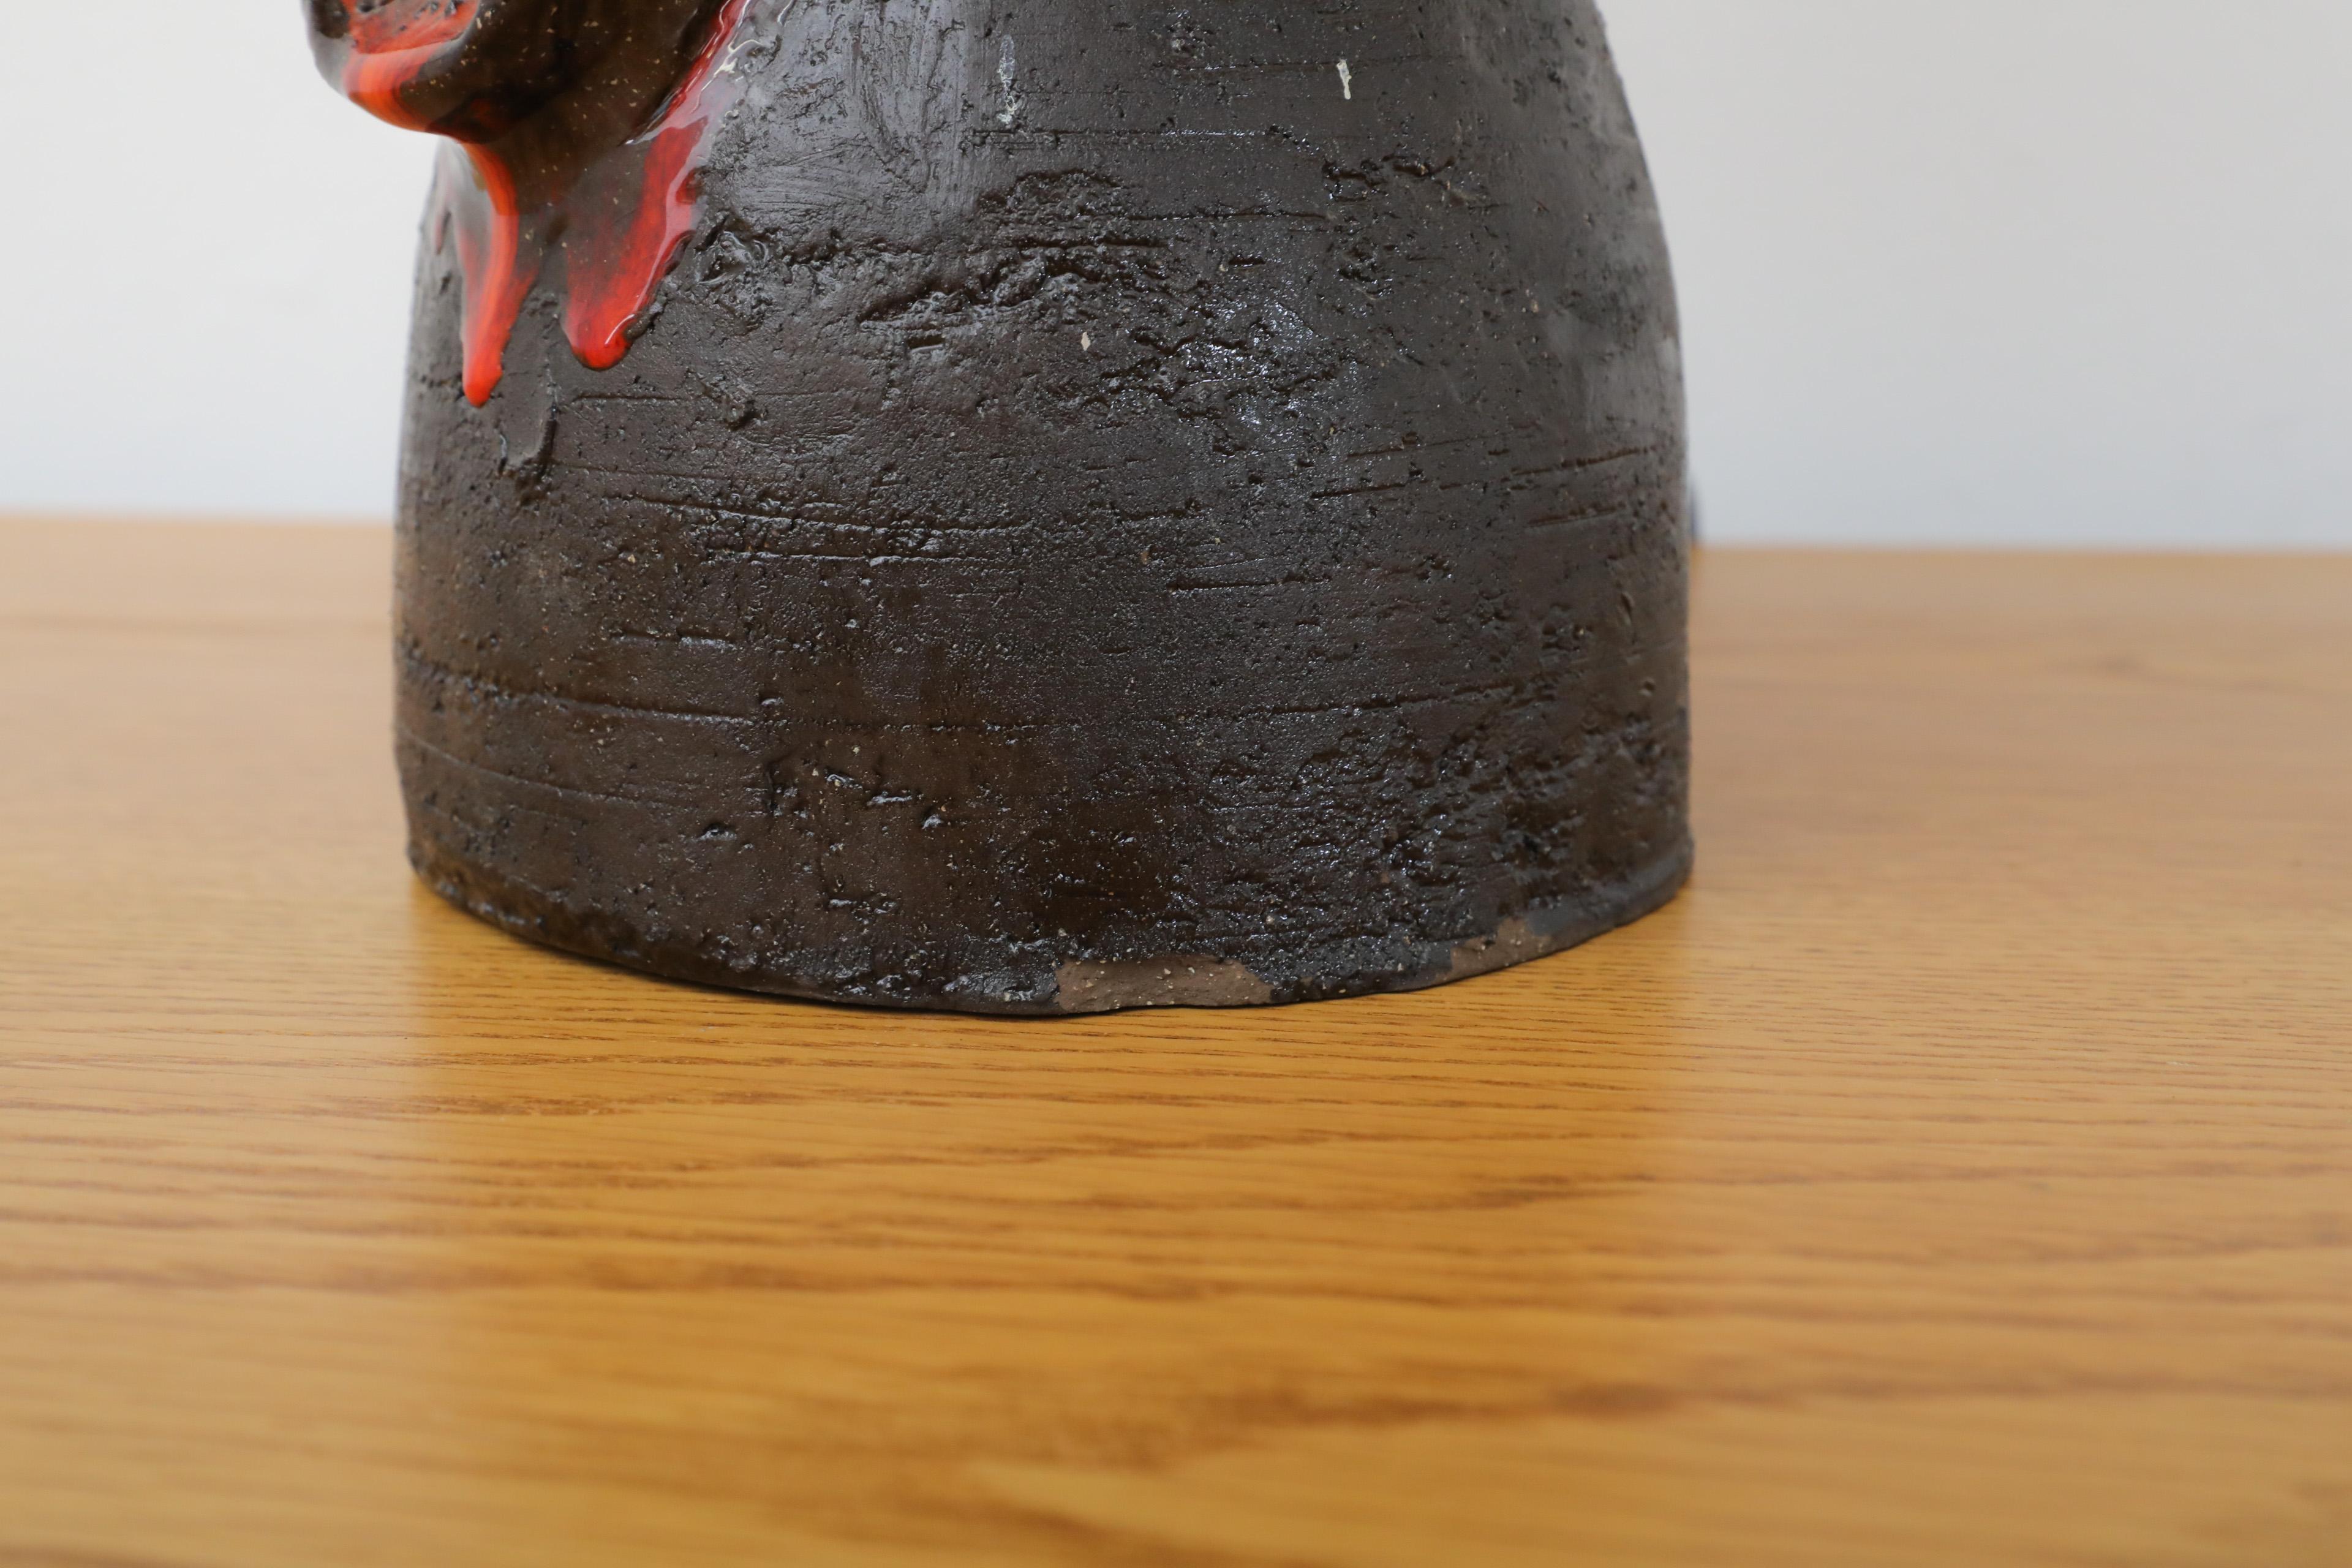 Dutch Mid-Century Black Ceramic Volcanic Table Lamp w/ Red Dripping Effect Glaze For Sale 8